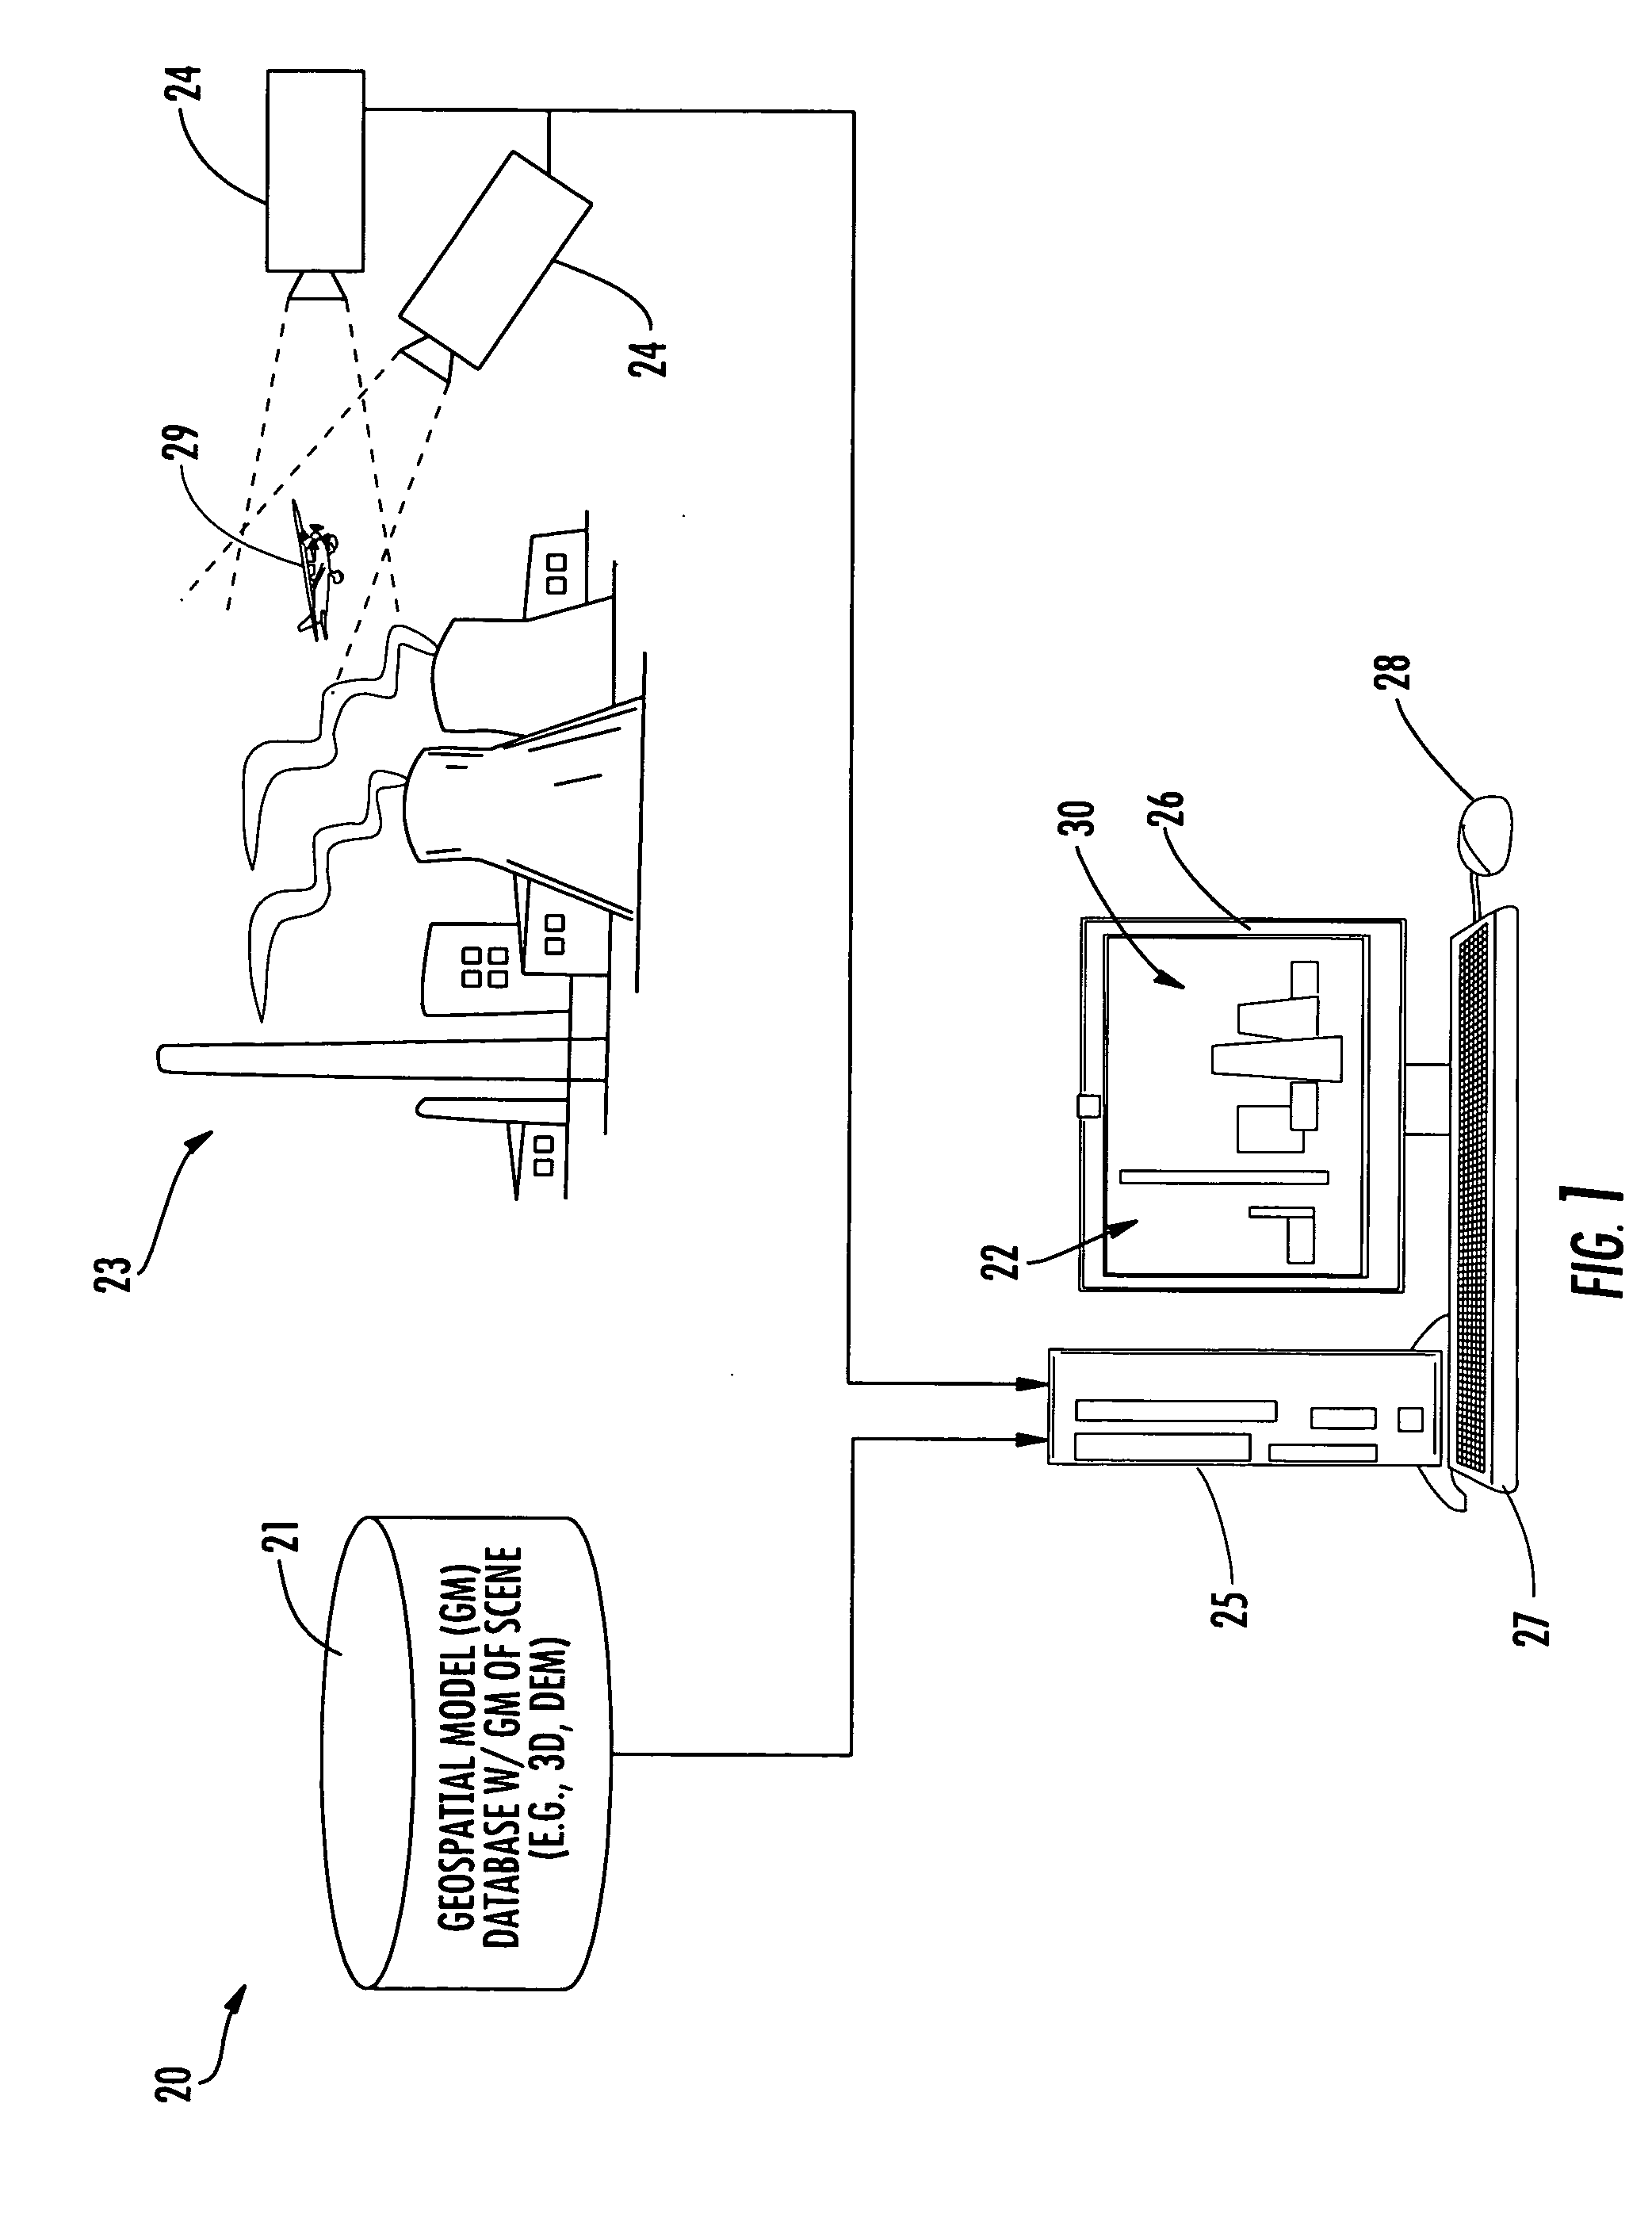 Video Surveillance System Providing Tracking of a Moving Object in a Geospatial Model and Related Methods